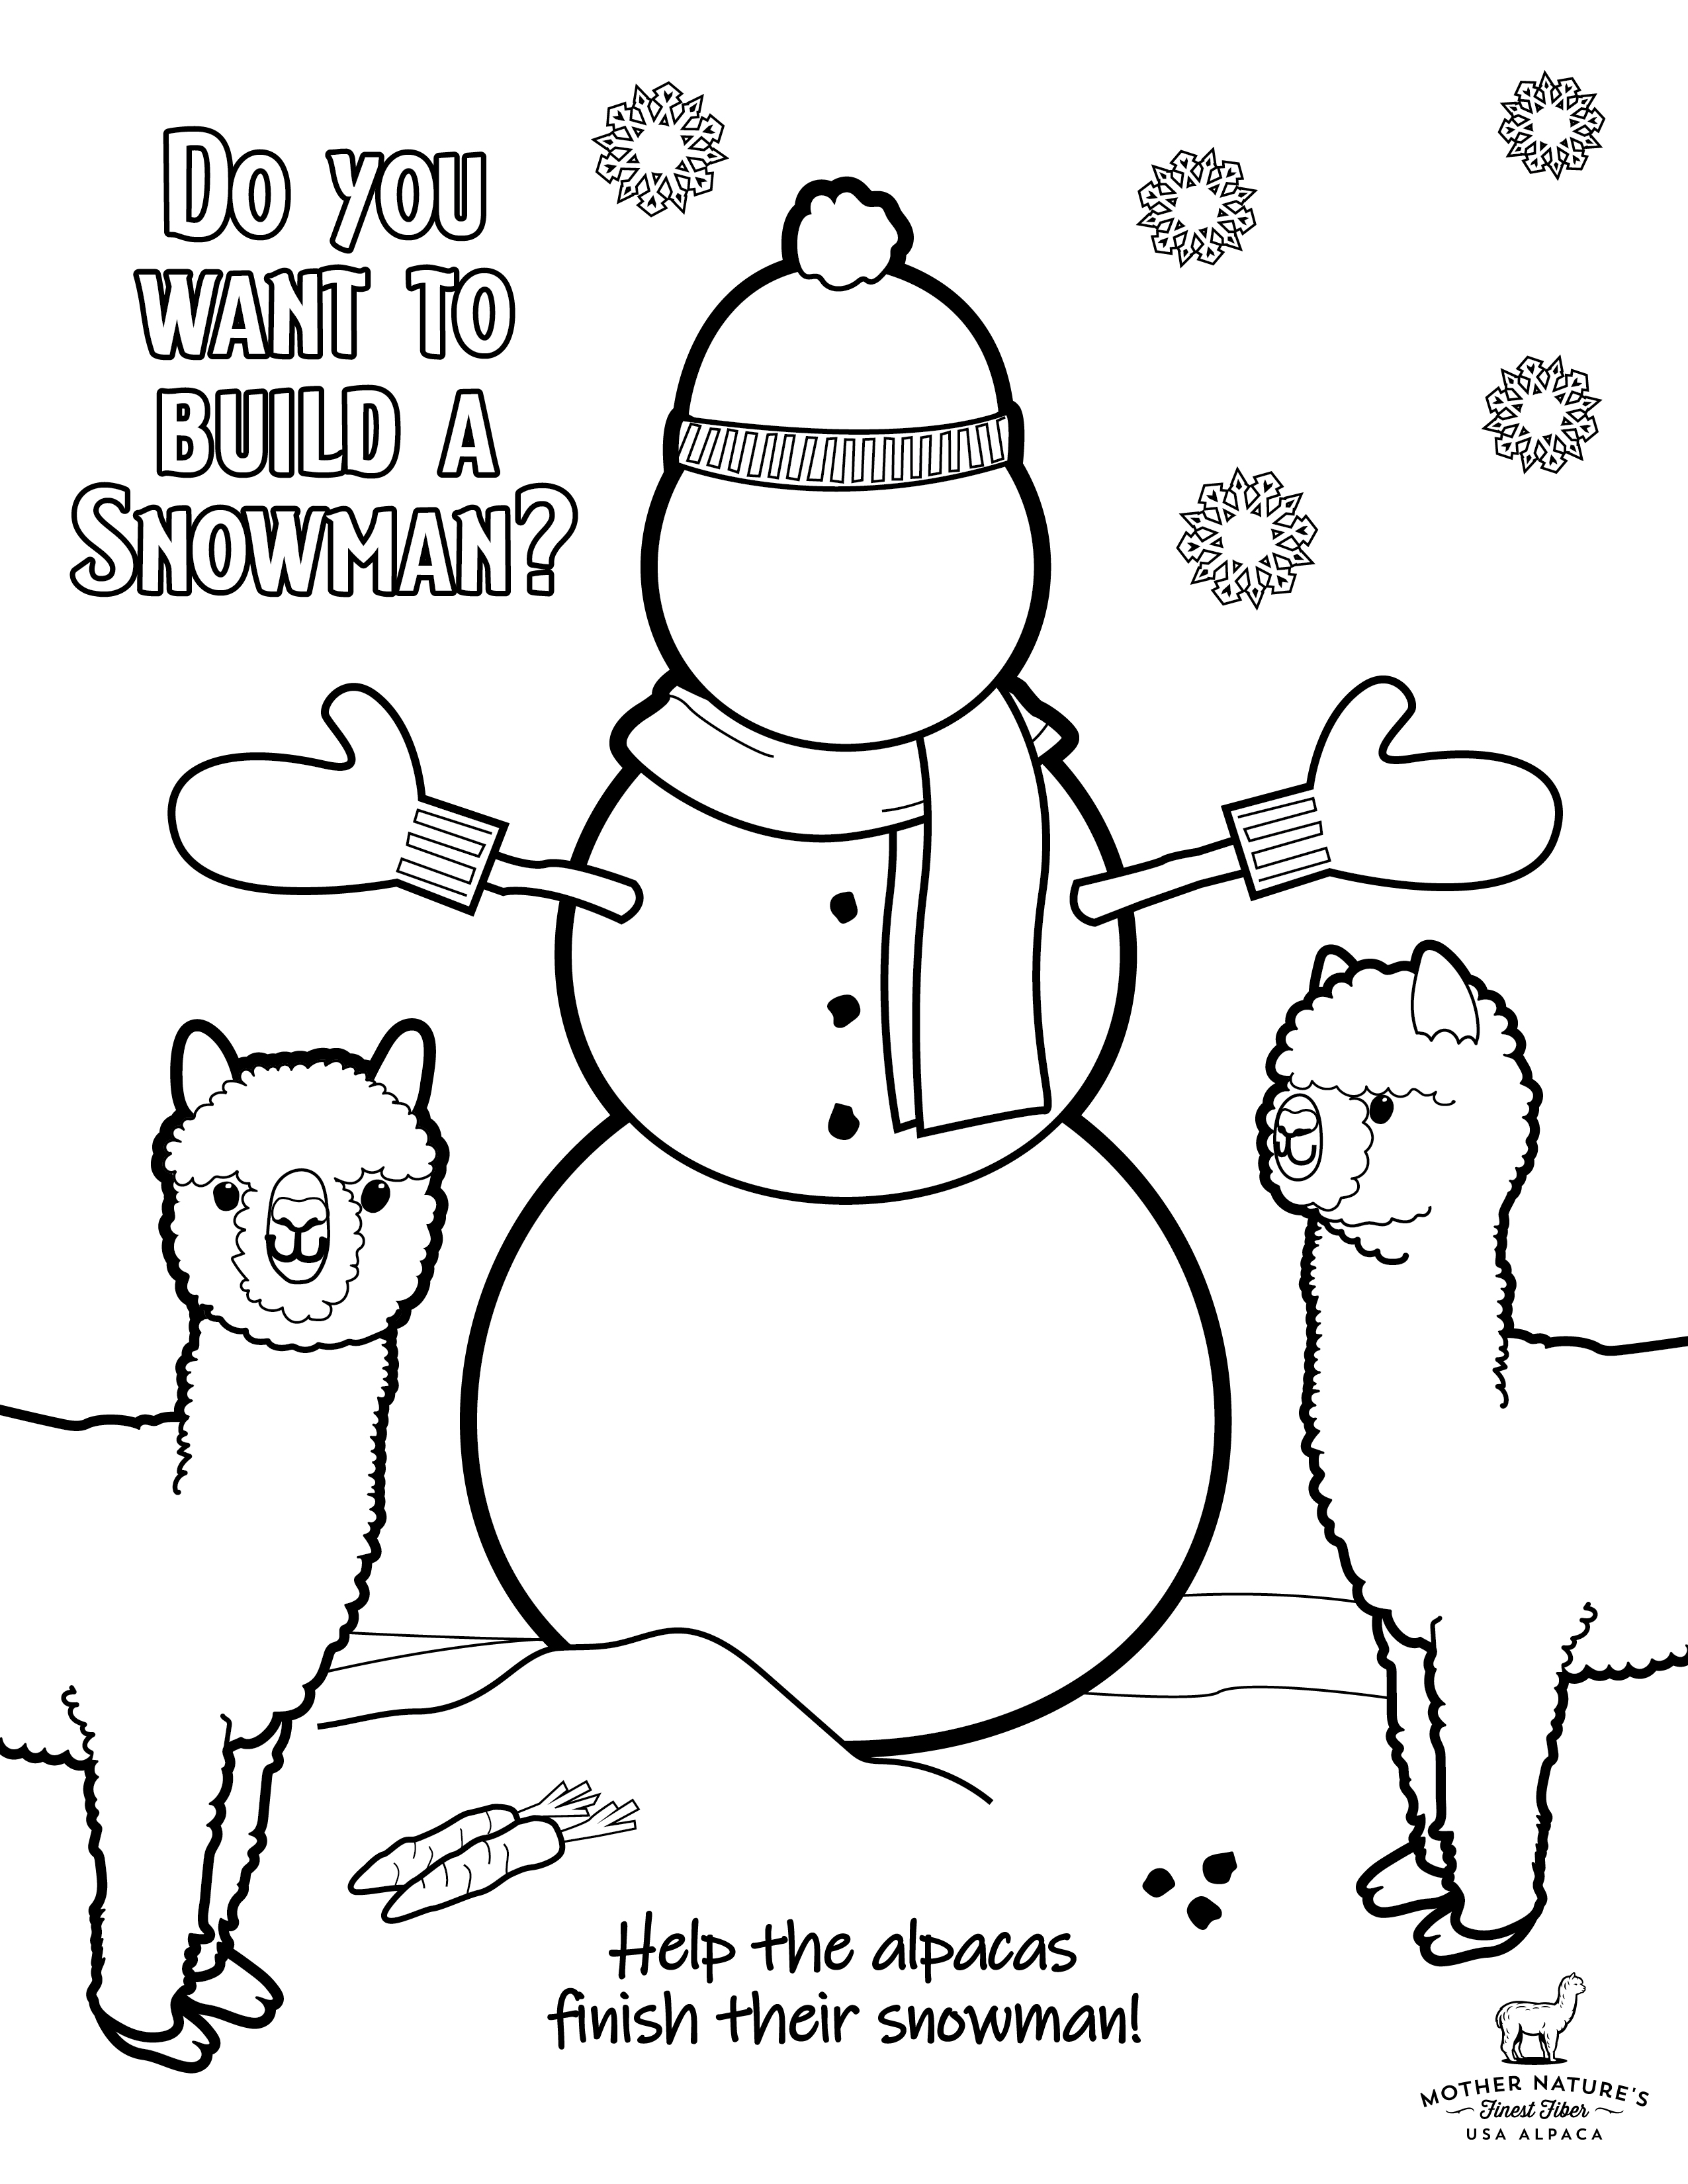 NEW Downloadable Content: January Coloring Page!